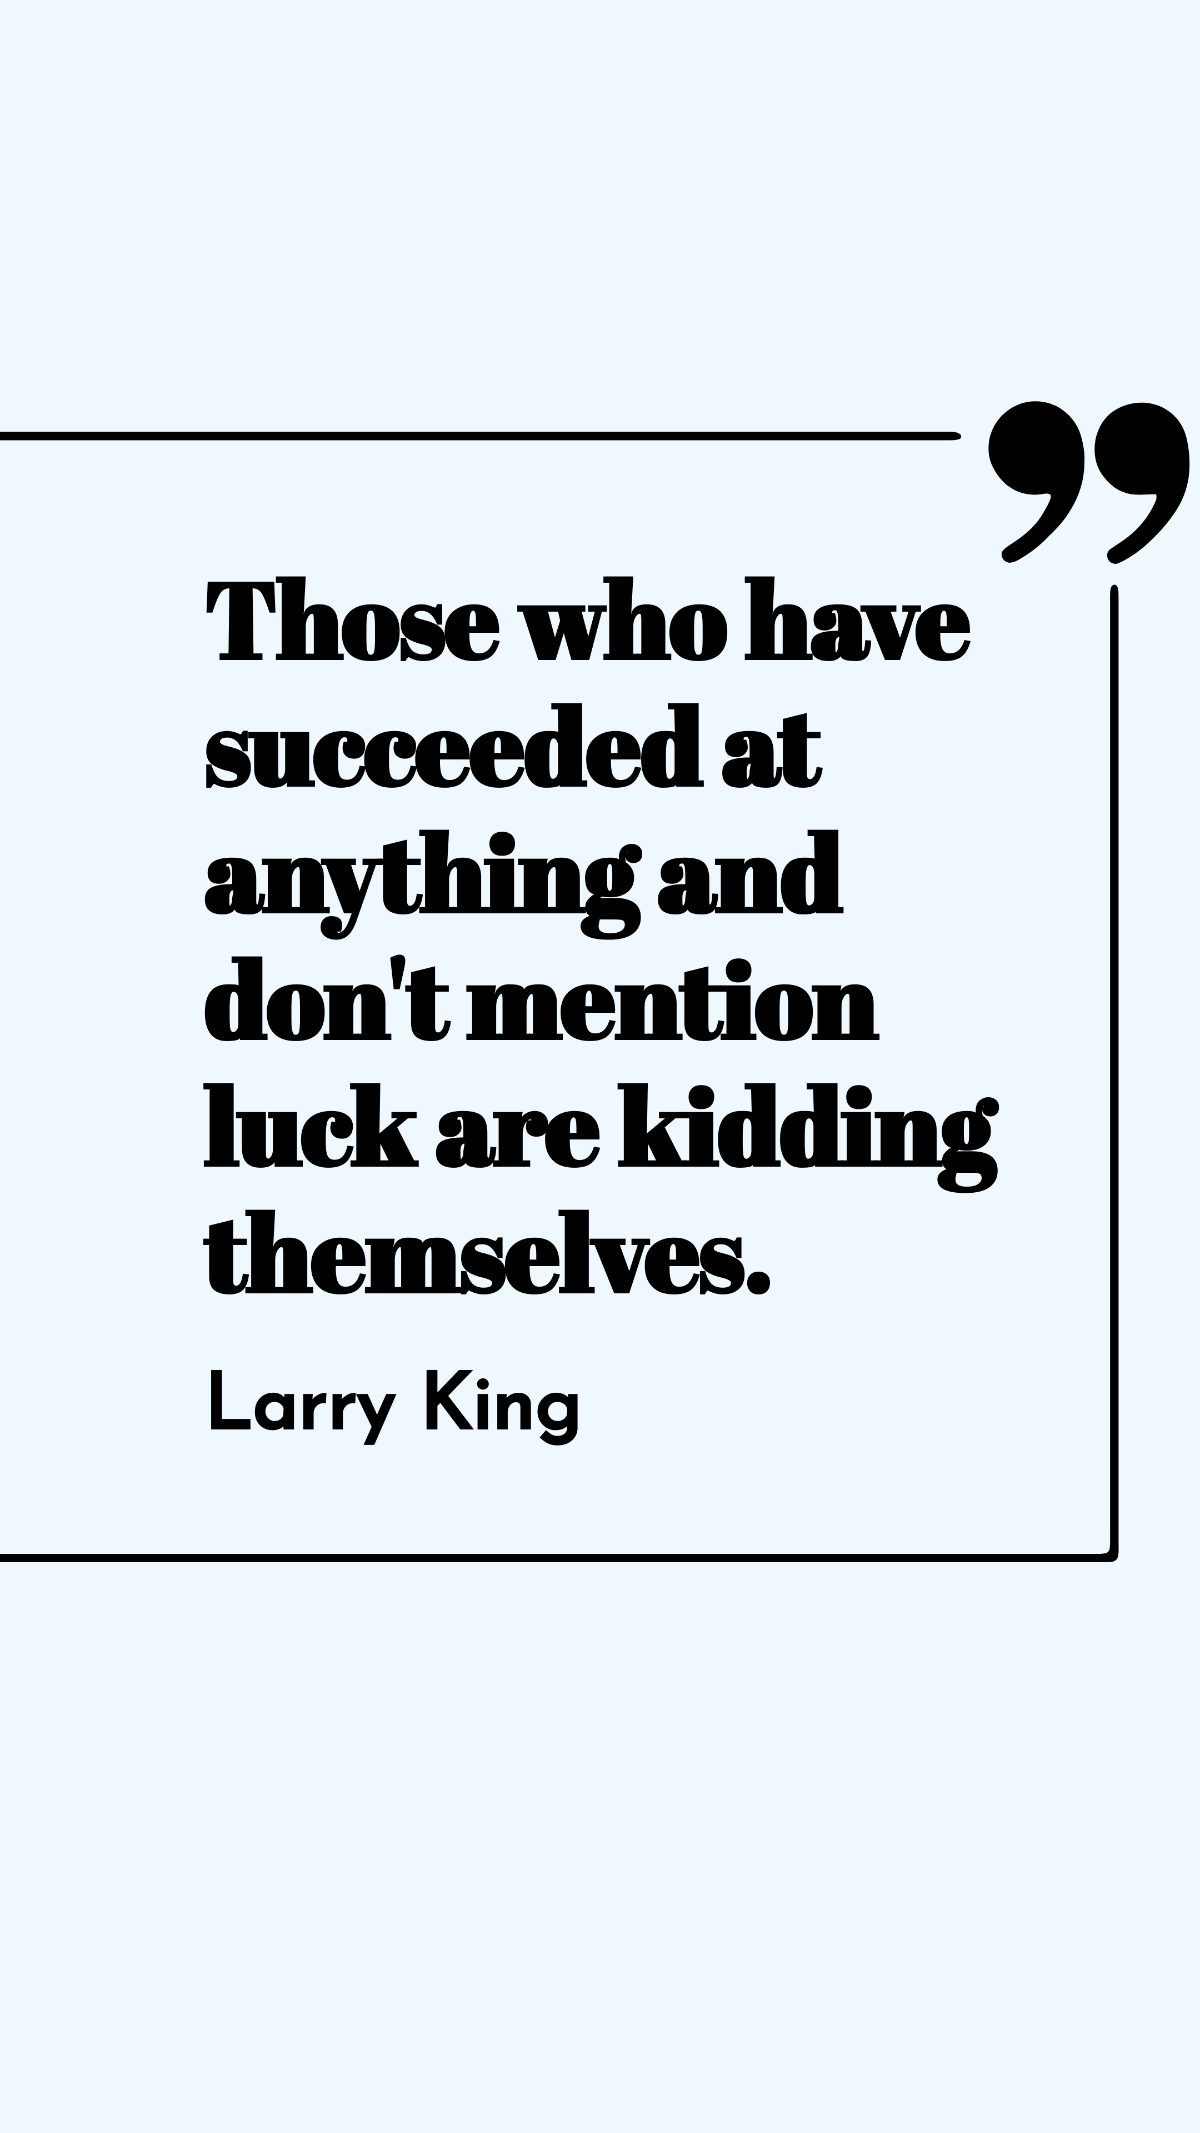 Larry King - Those who have succeeded at anything and don't mention luck are kidding themselves. Template